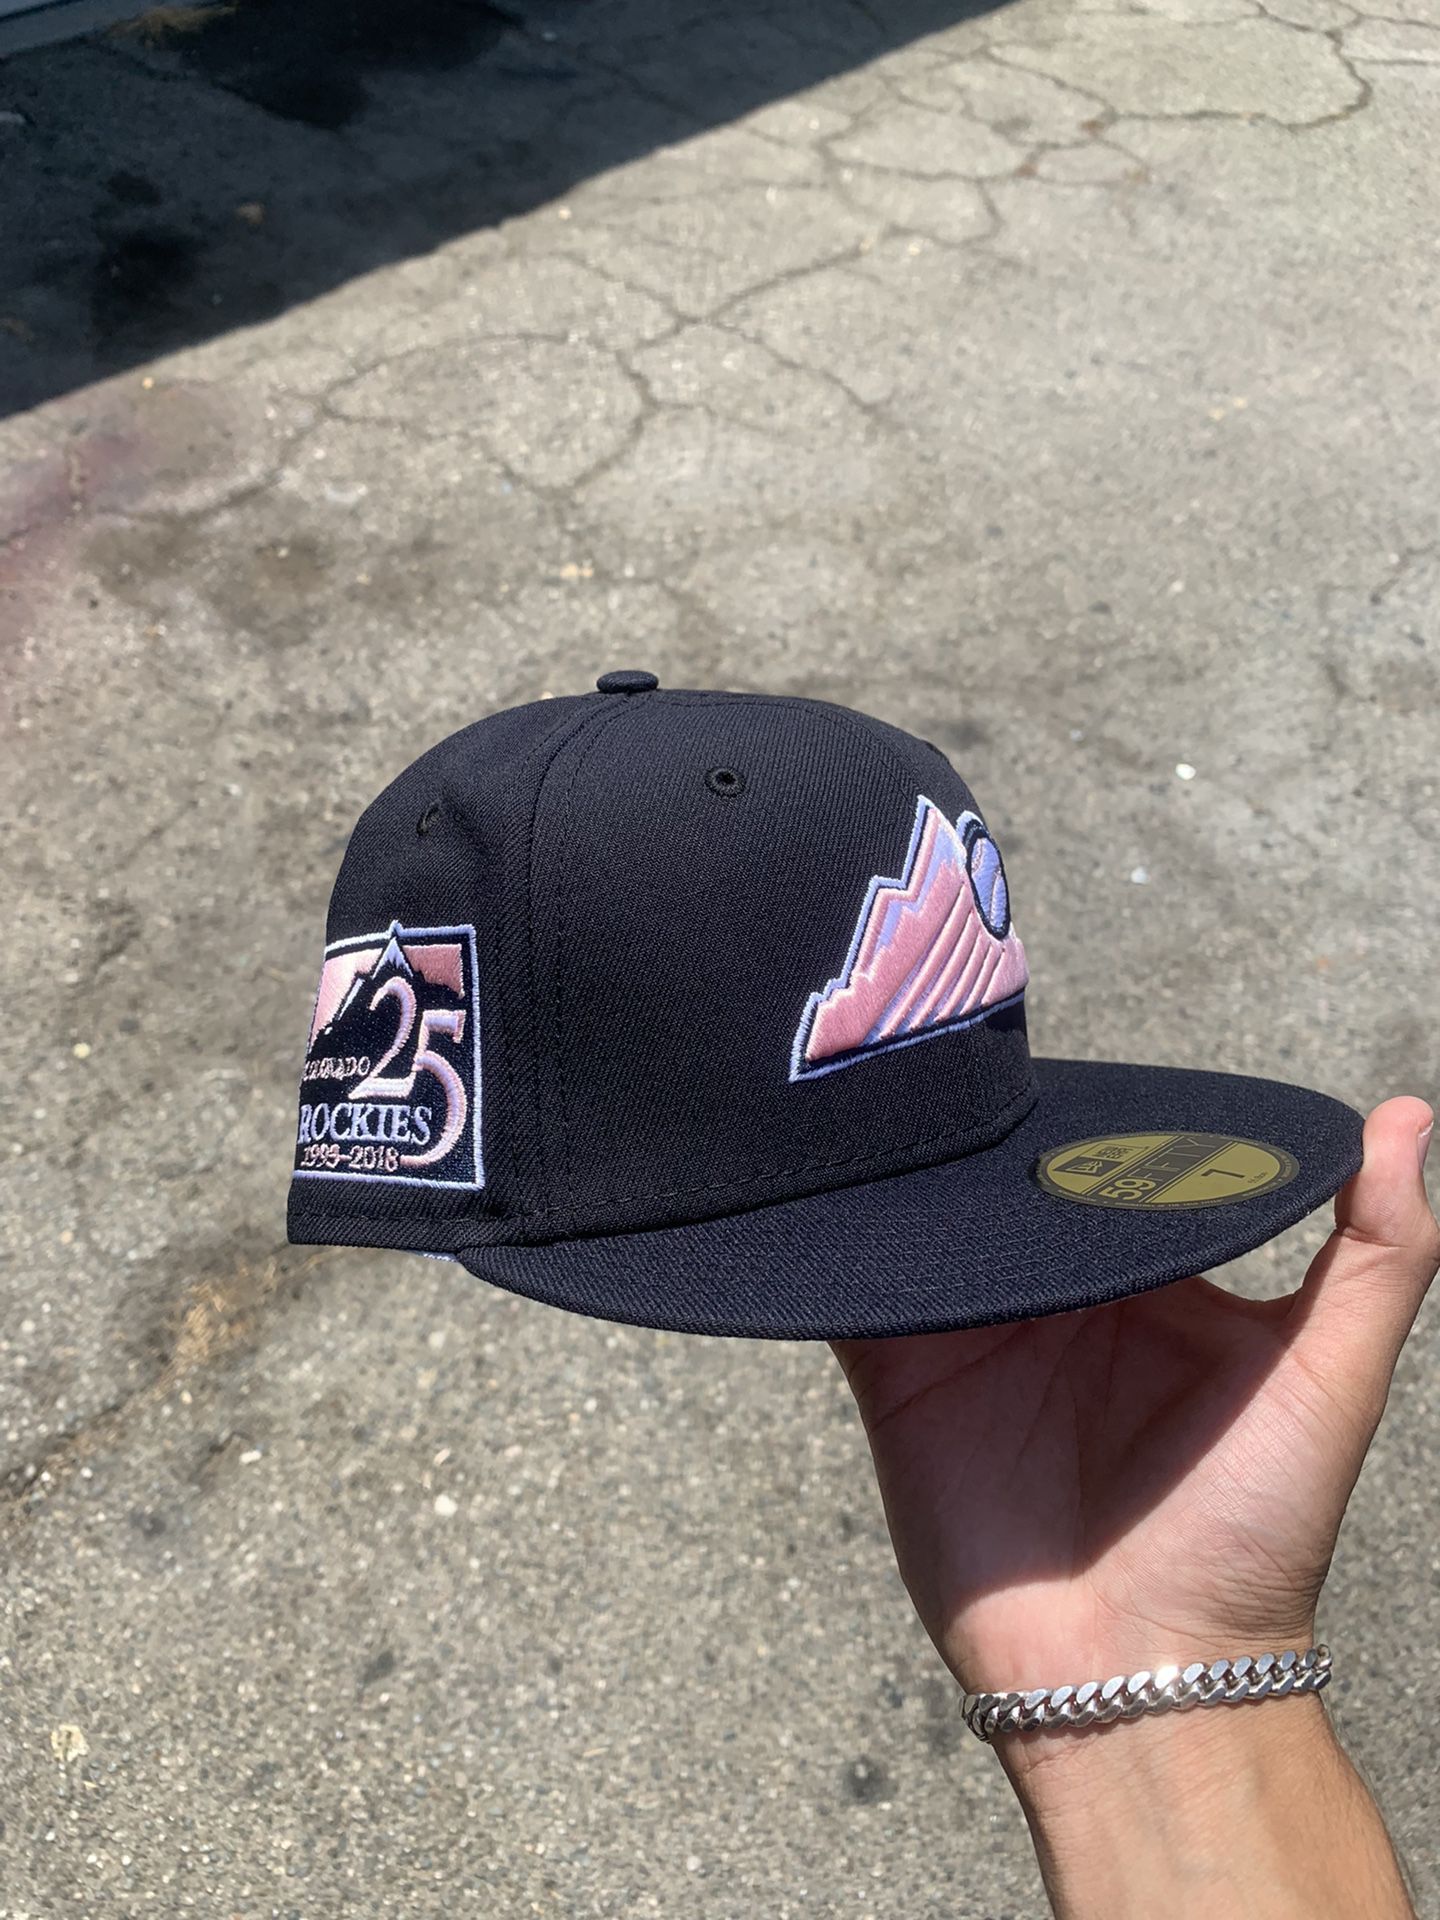 Colorado Rockies New Era Fitted Hat Size 7 for Sale in Bell Gardens, CA -  OfferUp